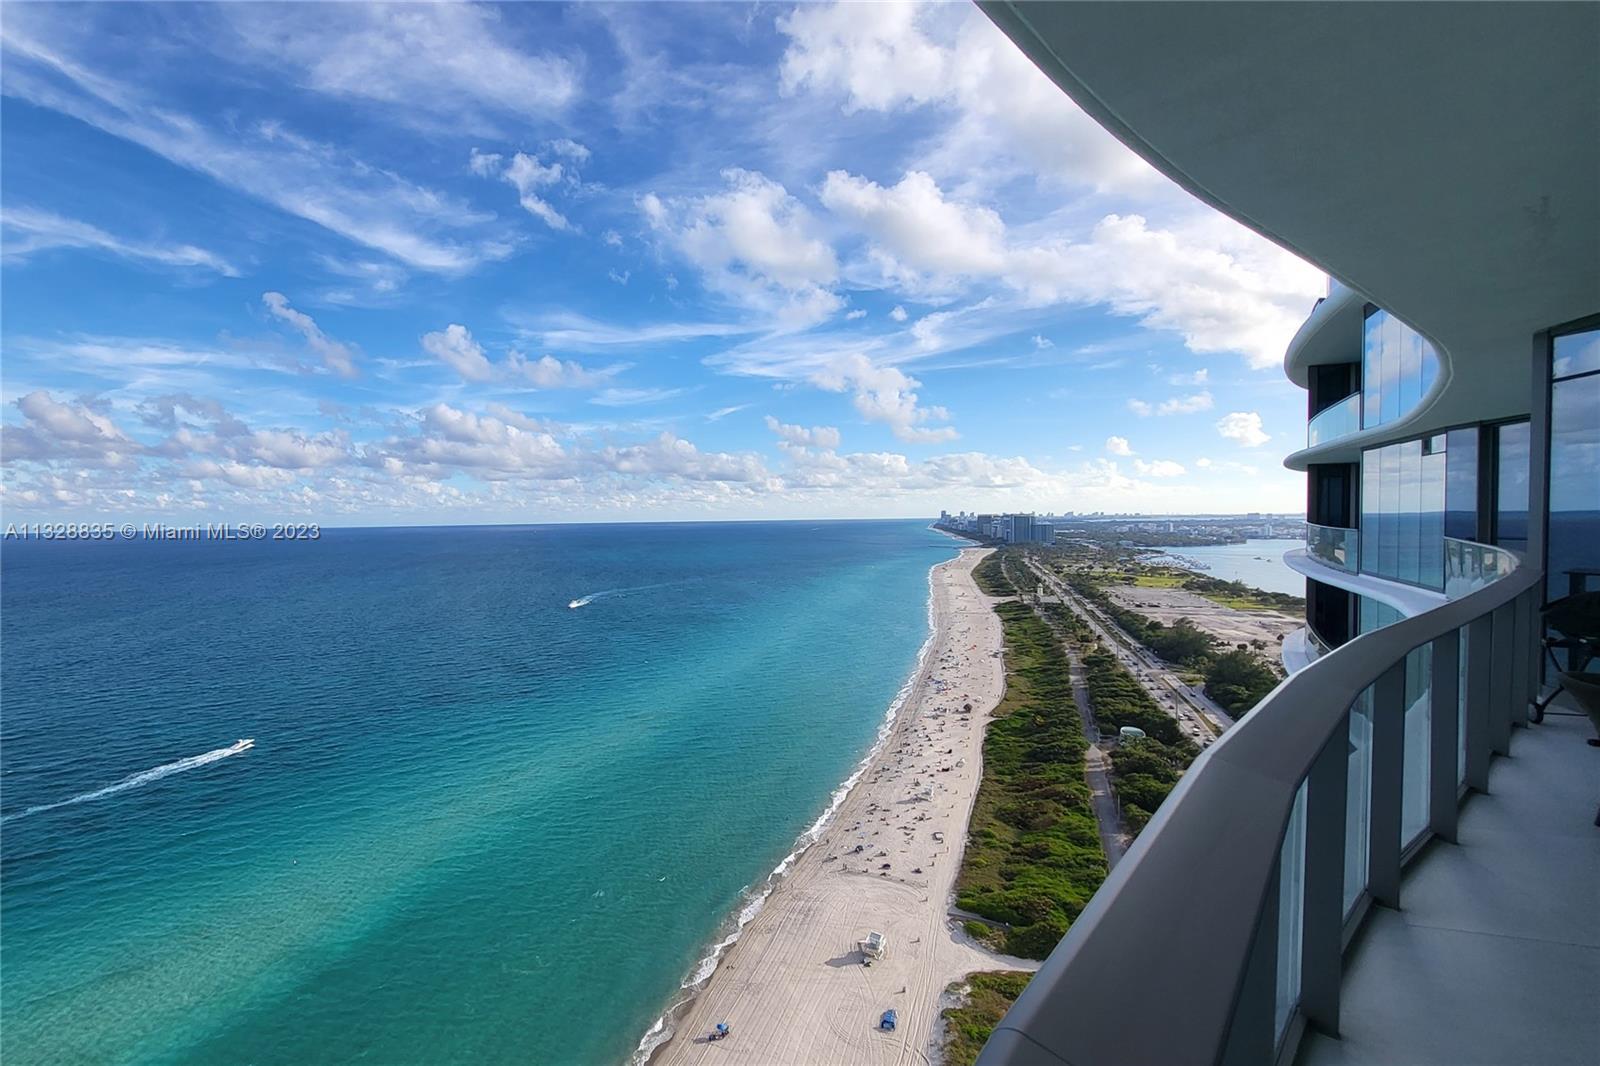 Implacably curated 3 beds + 3.5 baths residences at the Ritz-Carlton Sunny Isles Beach. This beachfront condo features unobstructed east/west water views, private elevator access, and resort amenities. Enjoy an unparalleled lifestyle in South Florida’s most desirable zip code.

Bonus to buyer-Automobile Lamborghini Super Trofeo by ImSim motion simulator.